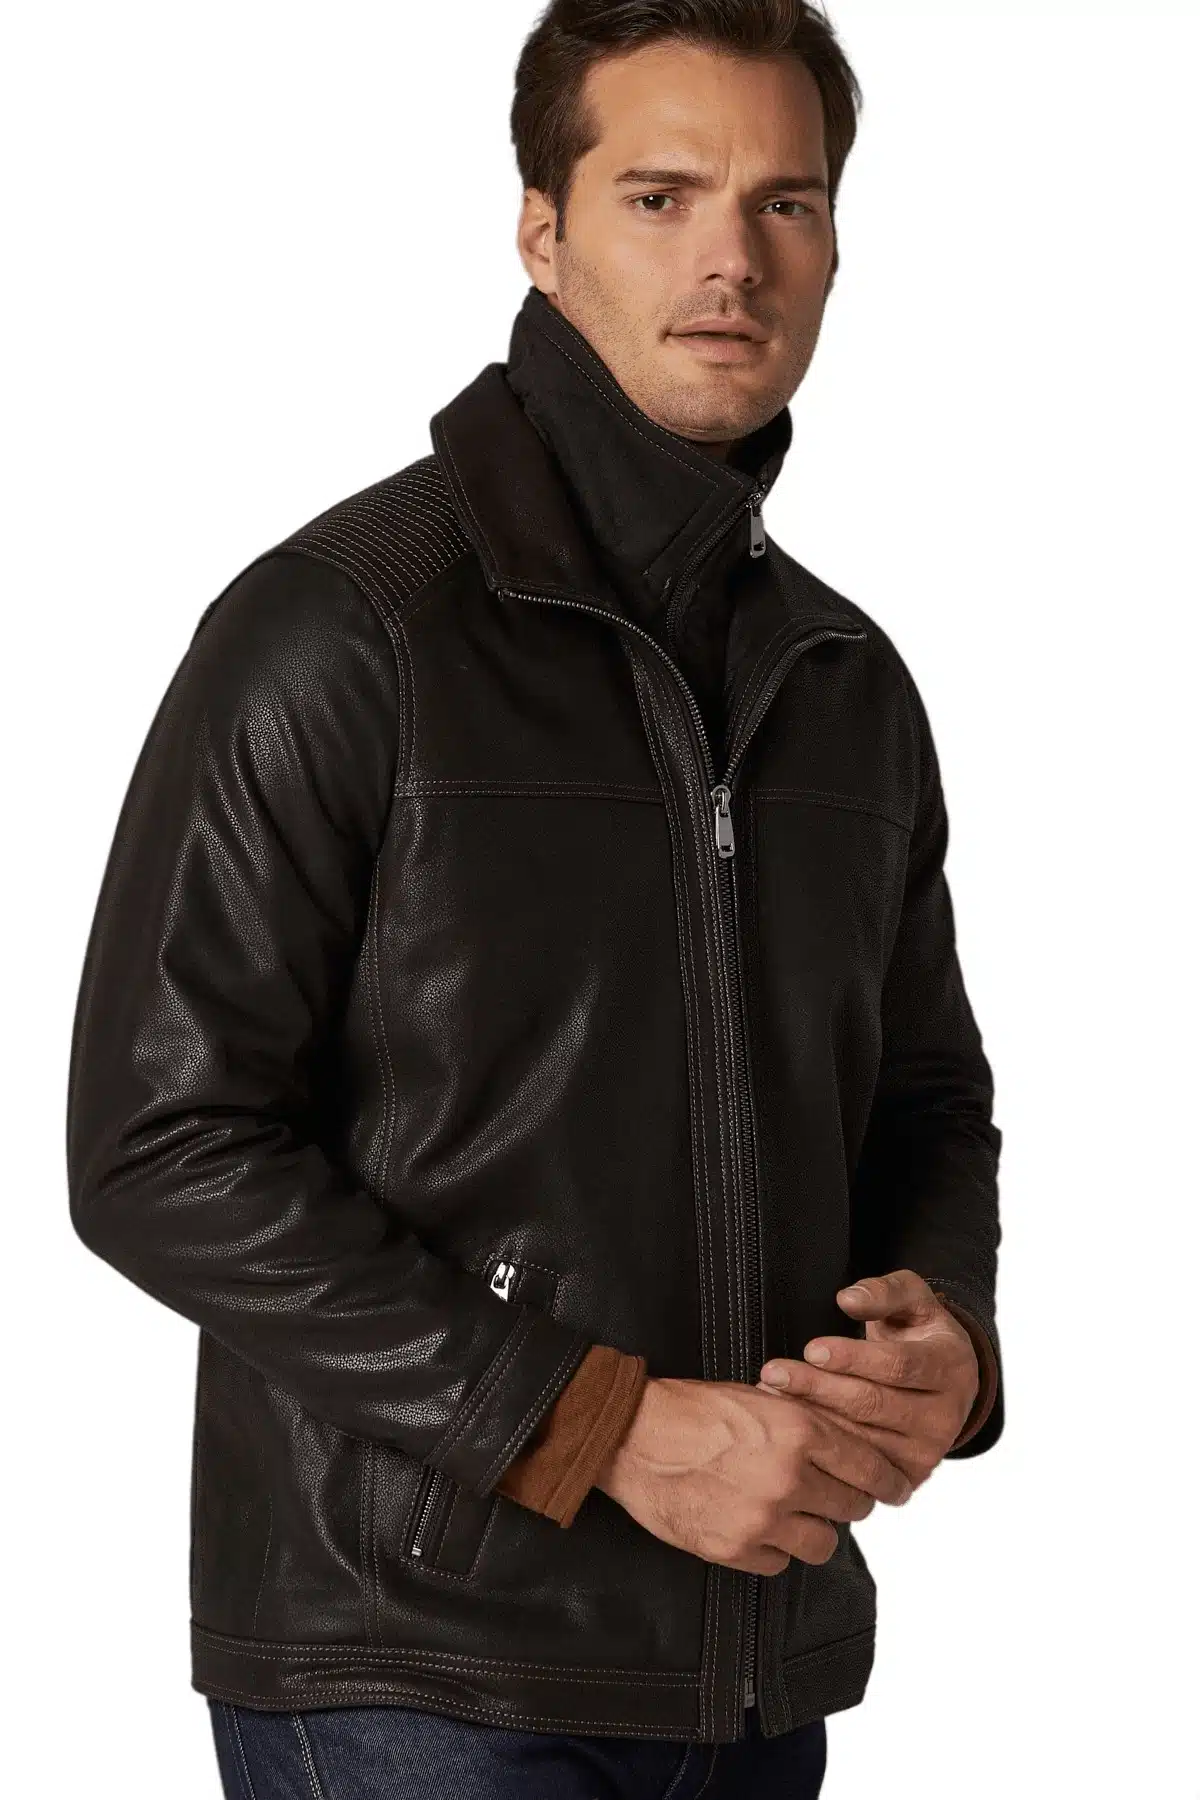 Bobby Men's 100 % Real Brown Leather Jacket